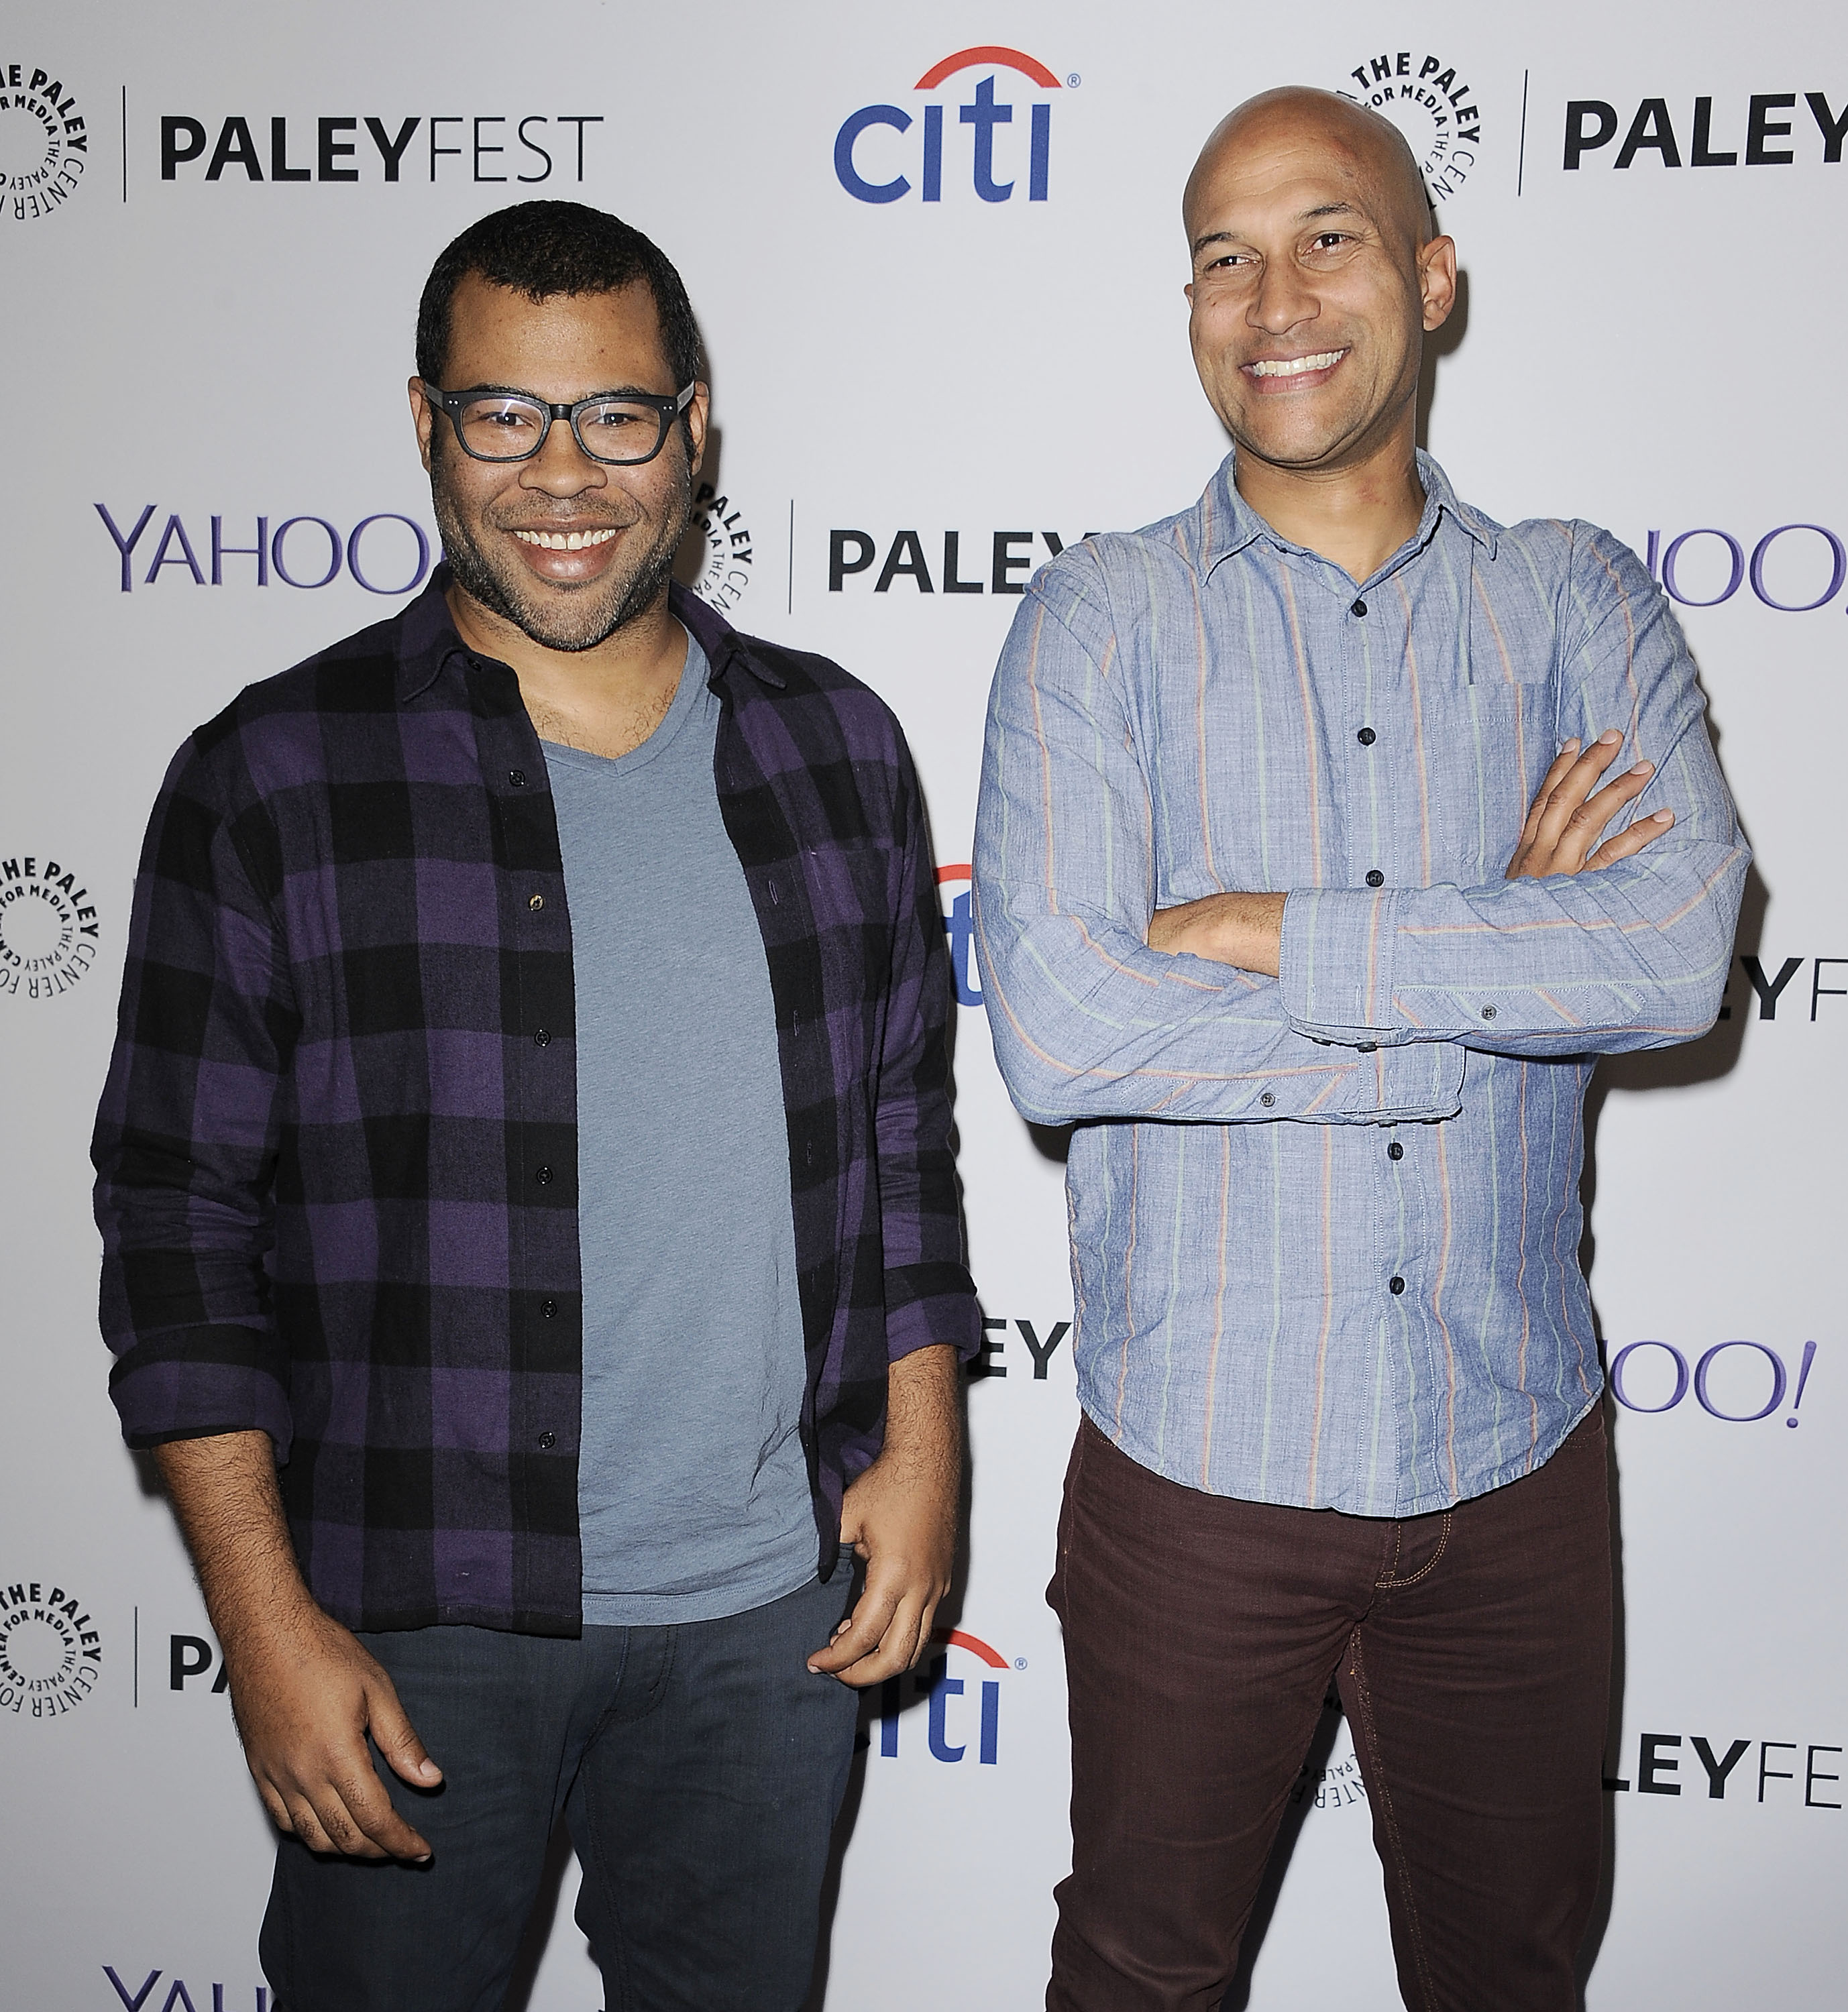 Jordan Peele and Keegan-Michael Key attend a salute to Comedy Central at the 32nd annual PaleyFest at Dolby Theatre on March 7, 2015 in Hollywood, California. (Jason LaVeris&mdash;FilmMagic)